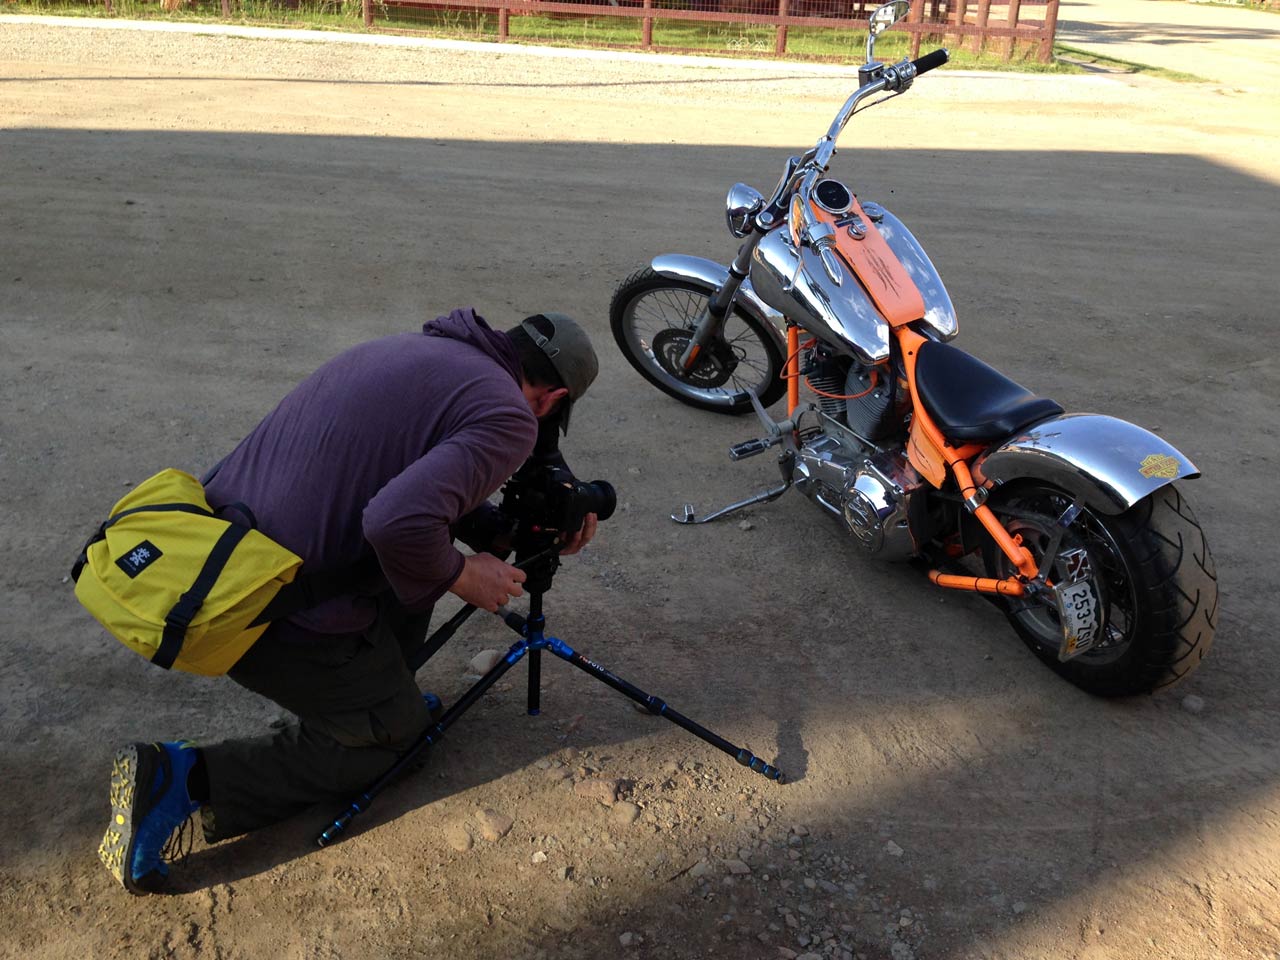 Jonathan lines up to film a Harley in Seligman